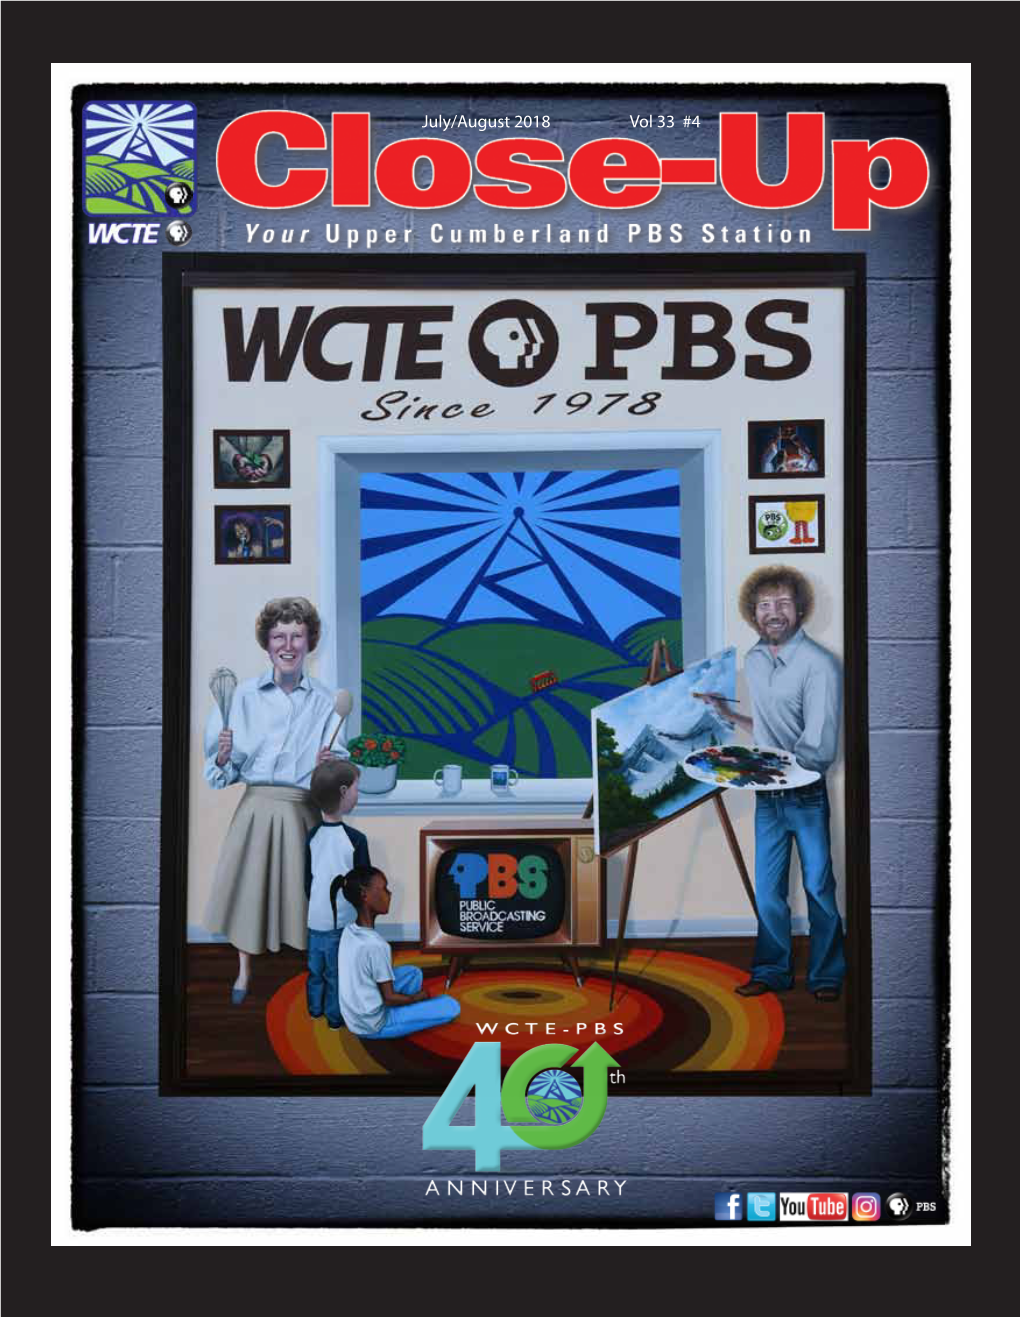 July/August 2018 Vol 33 #4 for 40 Years WCTE-TV/PBS Has Brought You the Best in PBS National and Local Programming